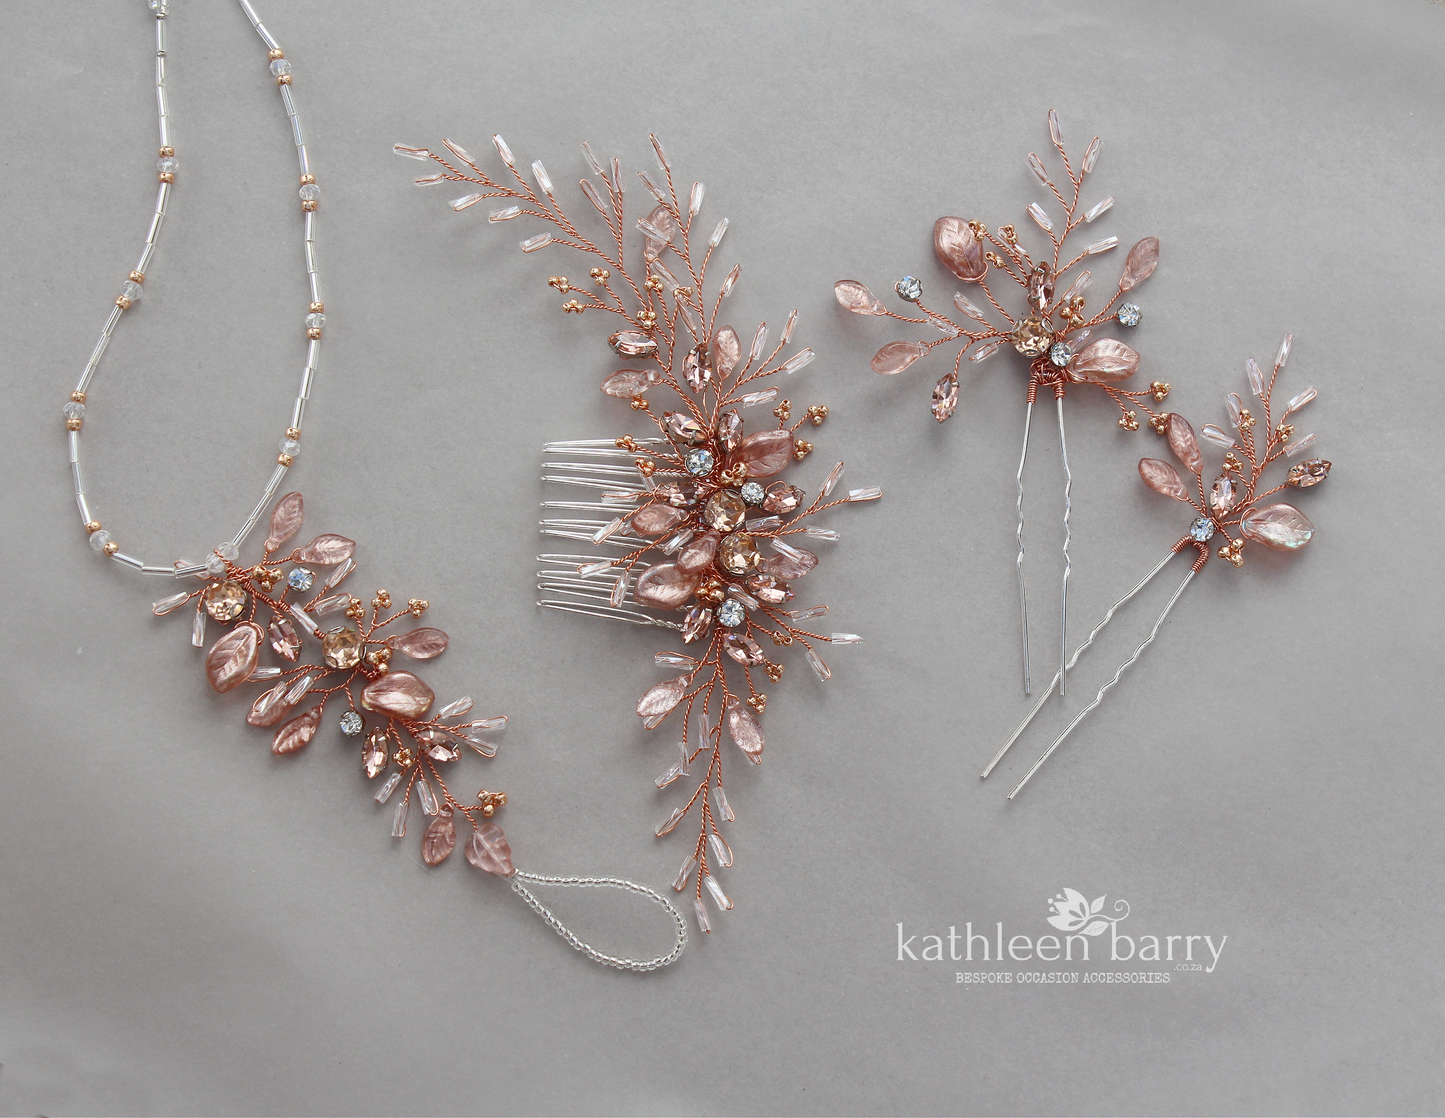 Gillian feathered leaf Rose gold bright copper hairpiece - available in Rose gold, Gold or Silver